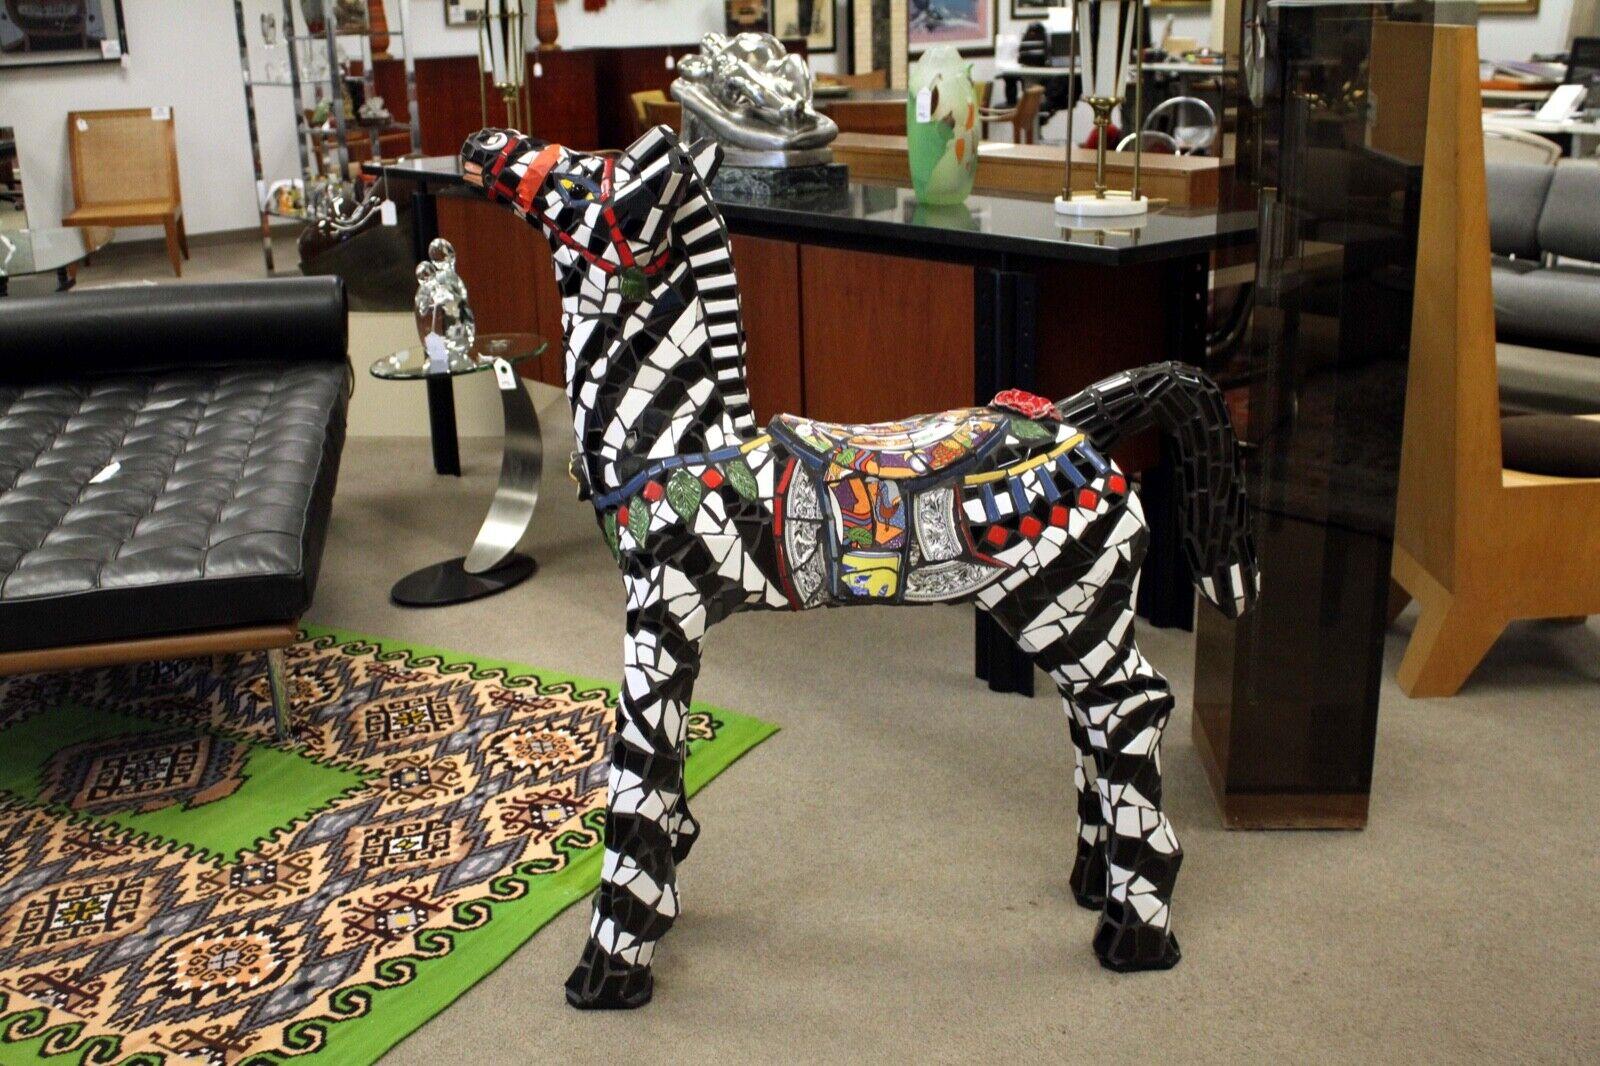 A marvelous mixed media mosaic life-size Zebra by California artist Terrie Kvenild. Signed by the artist. This sculpture makes a unique statement in any modern or contemporary home. Per the artist, 